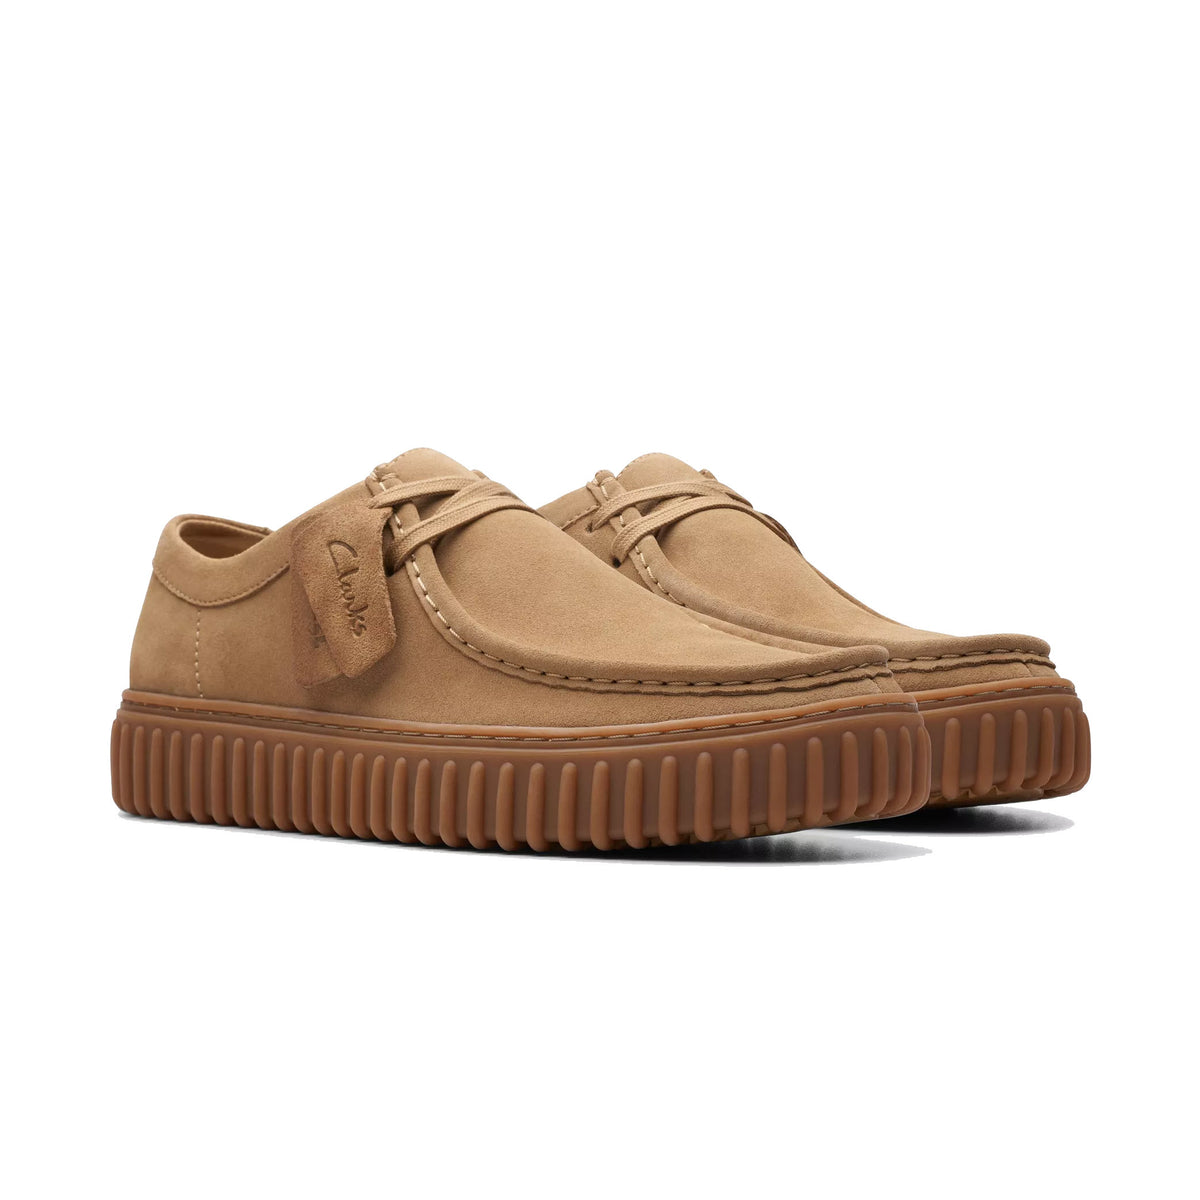 A pair of light brown leather Clarks Torhill Low Oxford shoes with a ribbed outsole, isolated on a white background.